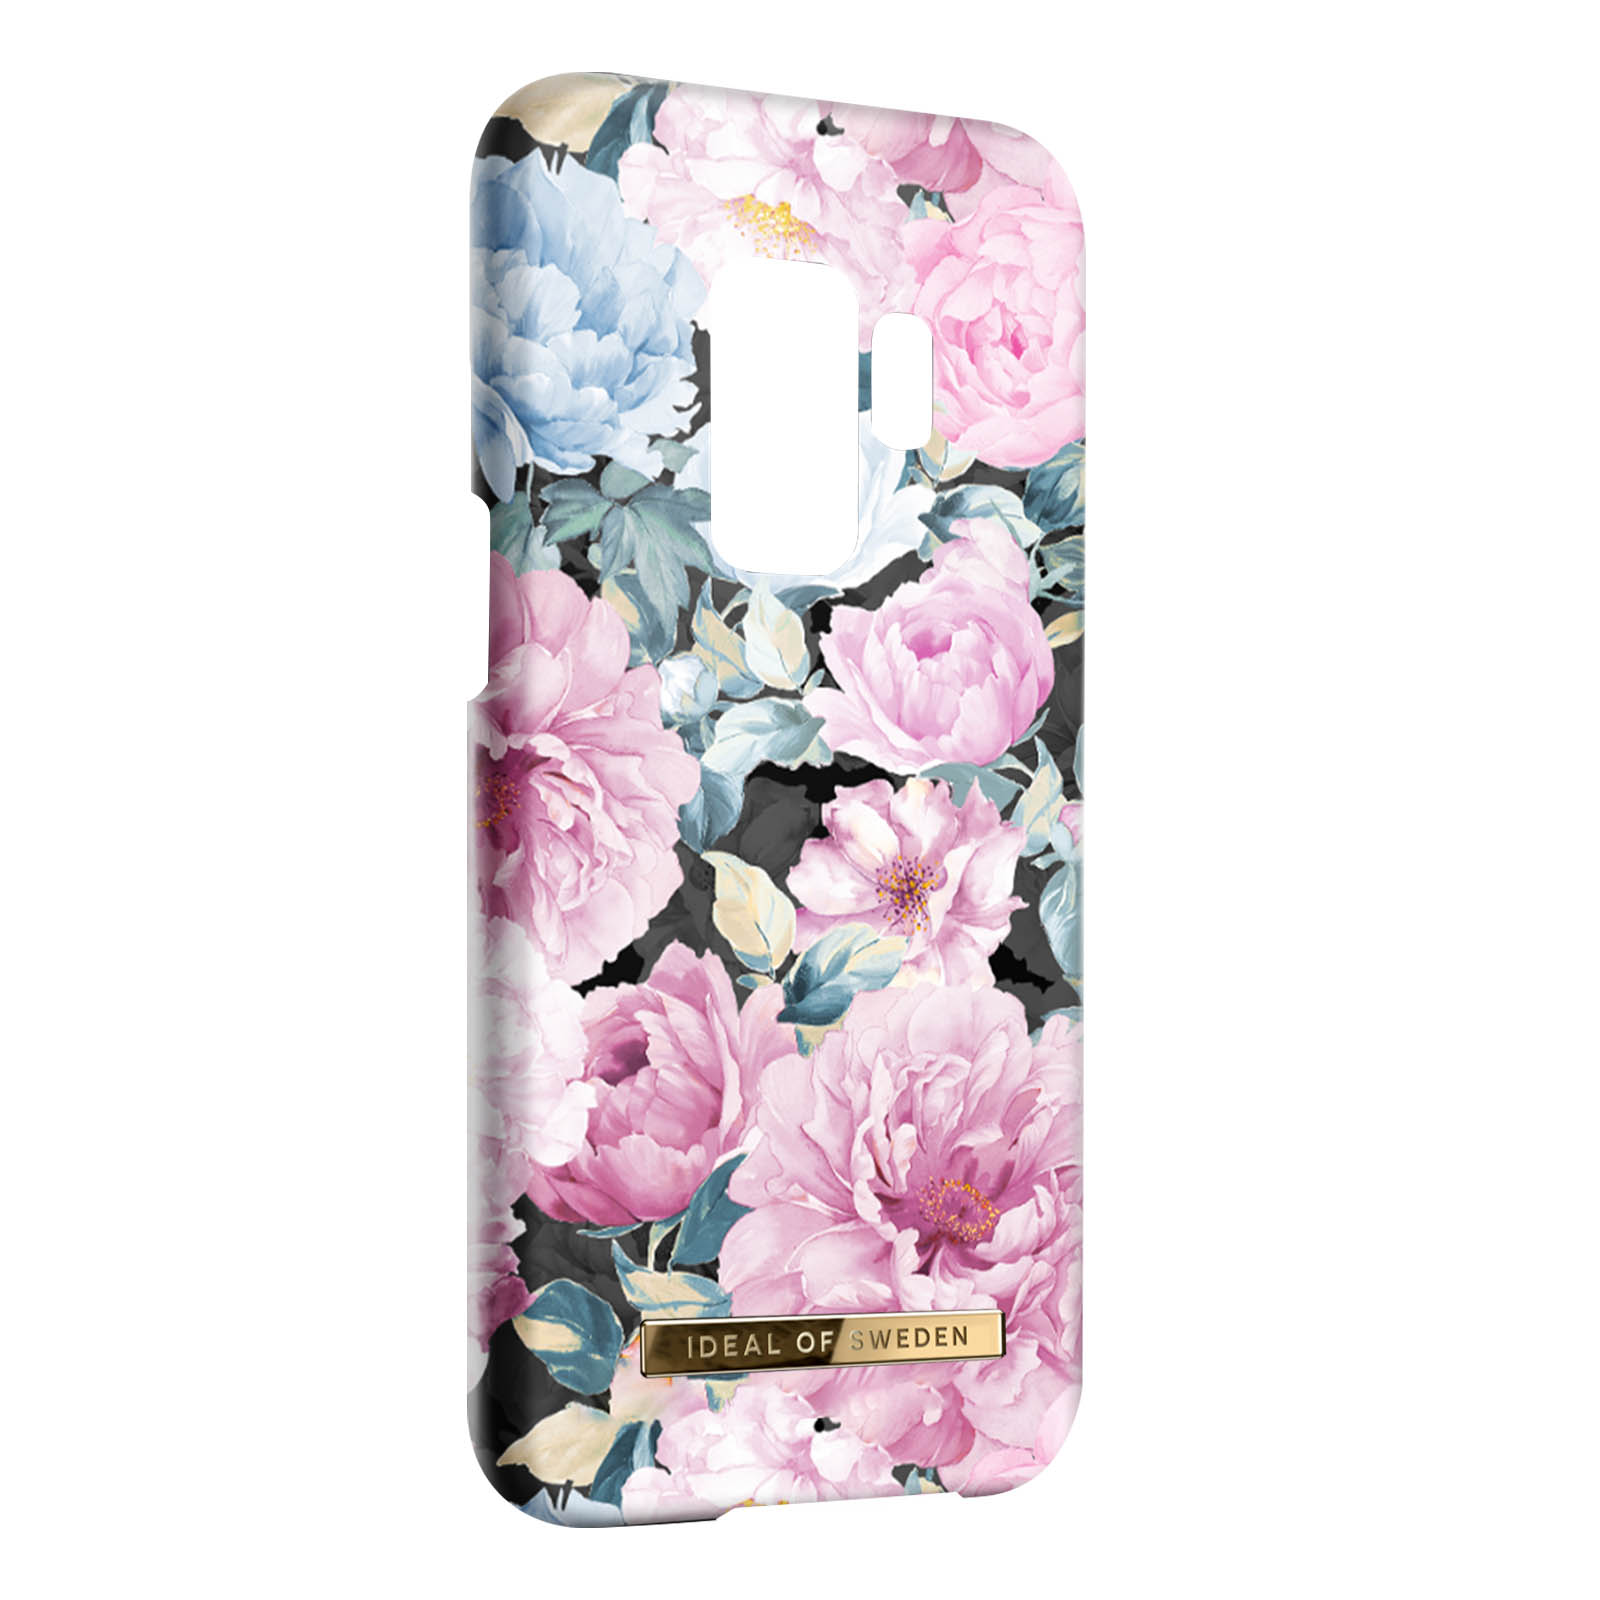 S9, Rosa Garden Hülle Samsung, Backcover, SWEDEN IDEAL OF Galaxy Peony Series,